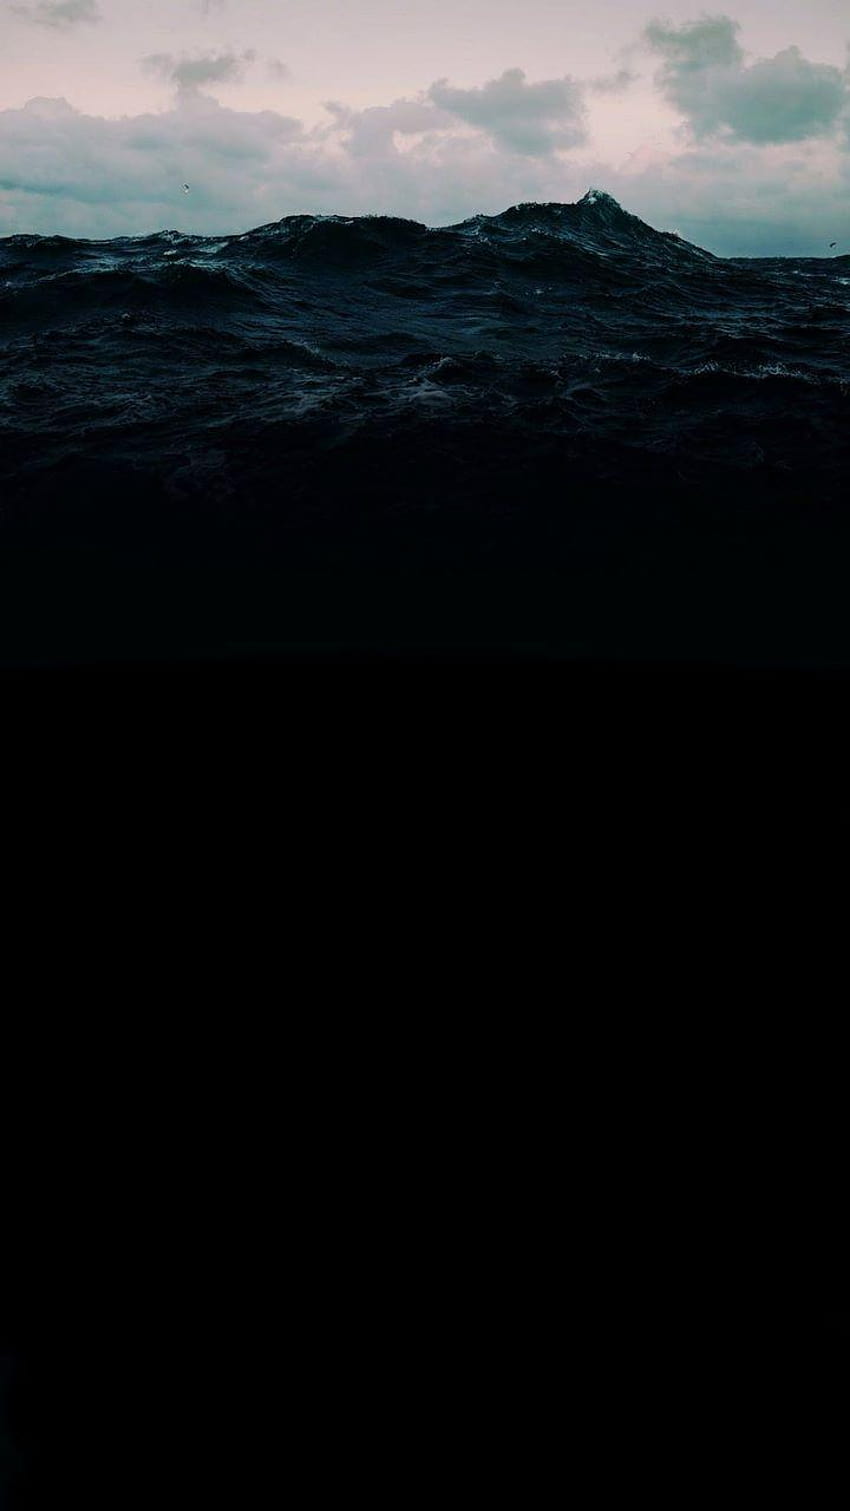 Amoled Water for Android, amoled ocean HD phone wallpaper